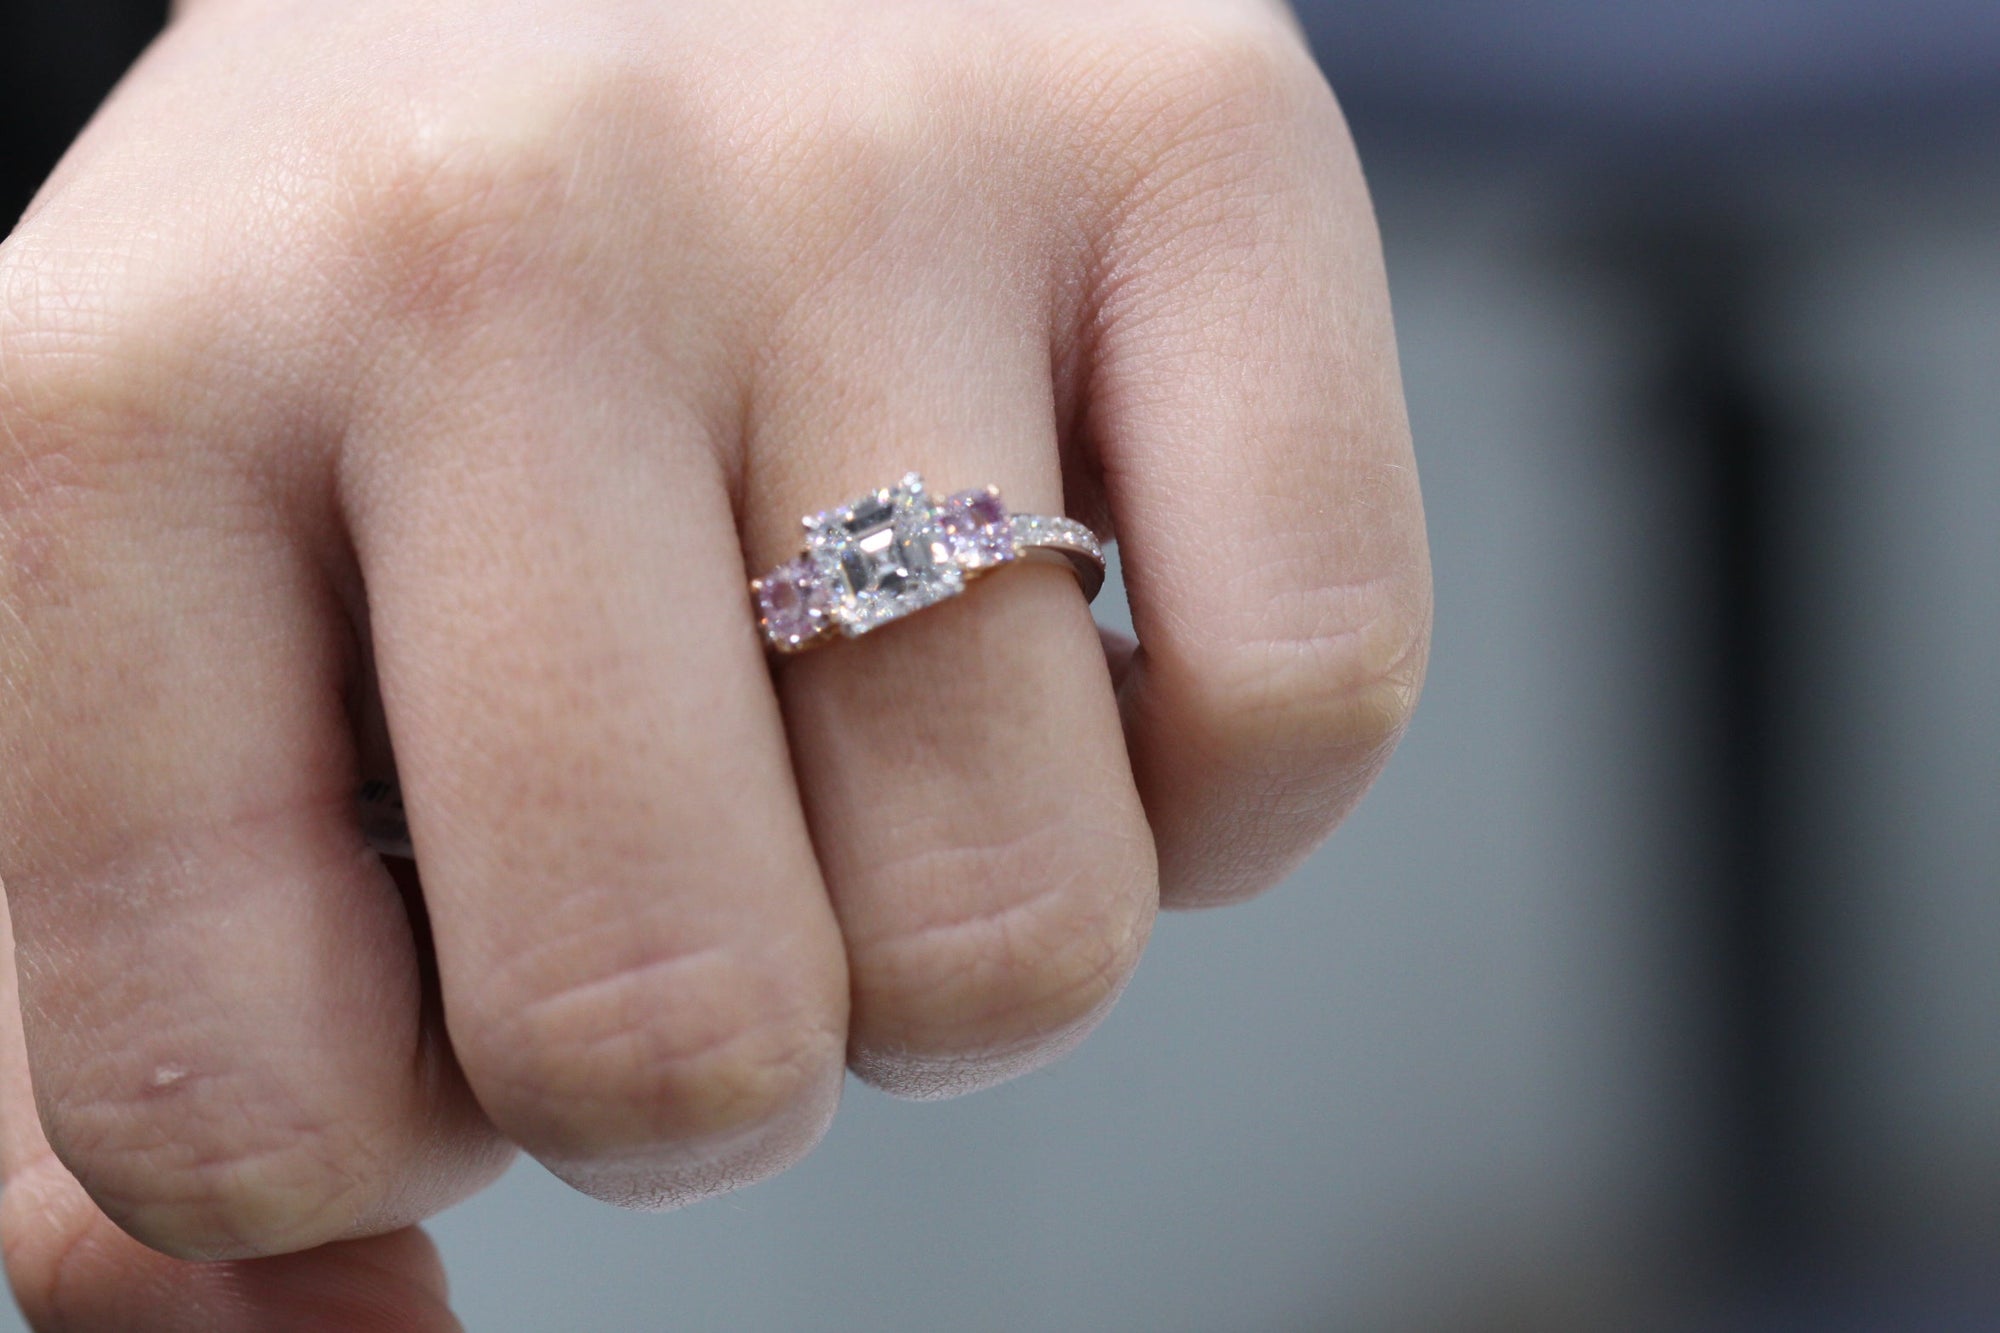 Pink diamond steals show at Geneva auction, fetches $18M